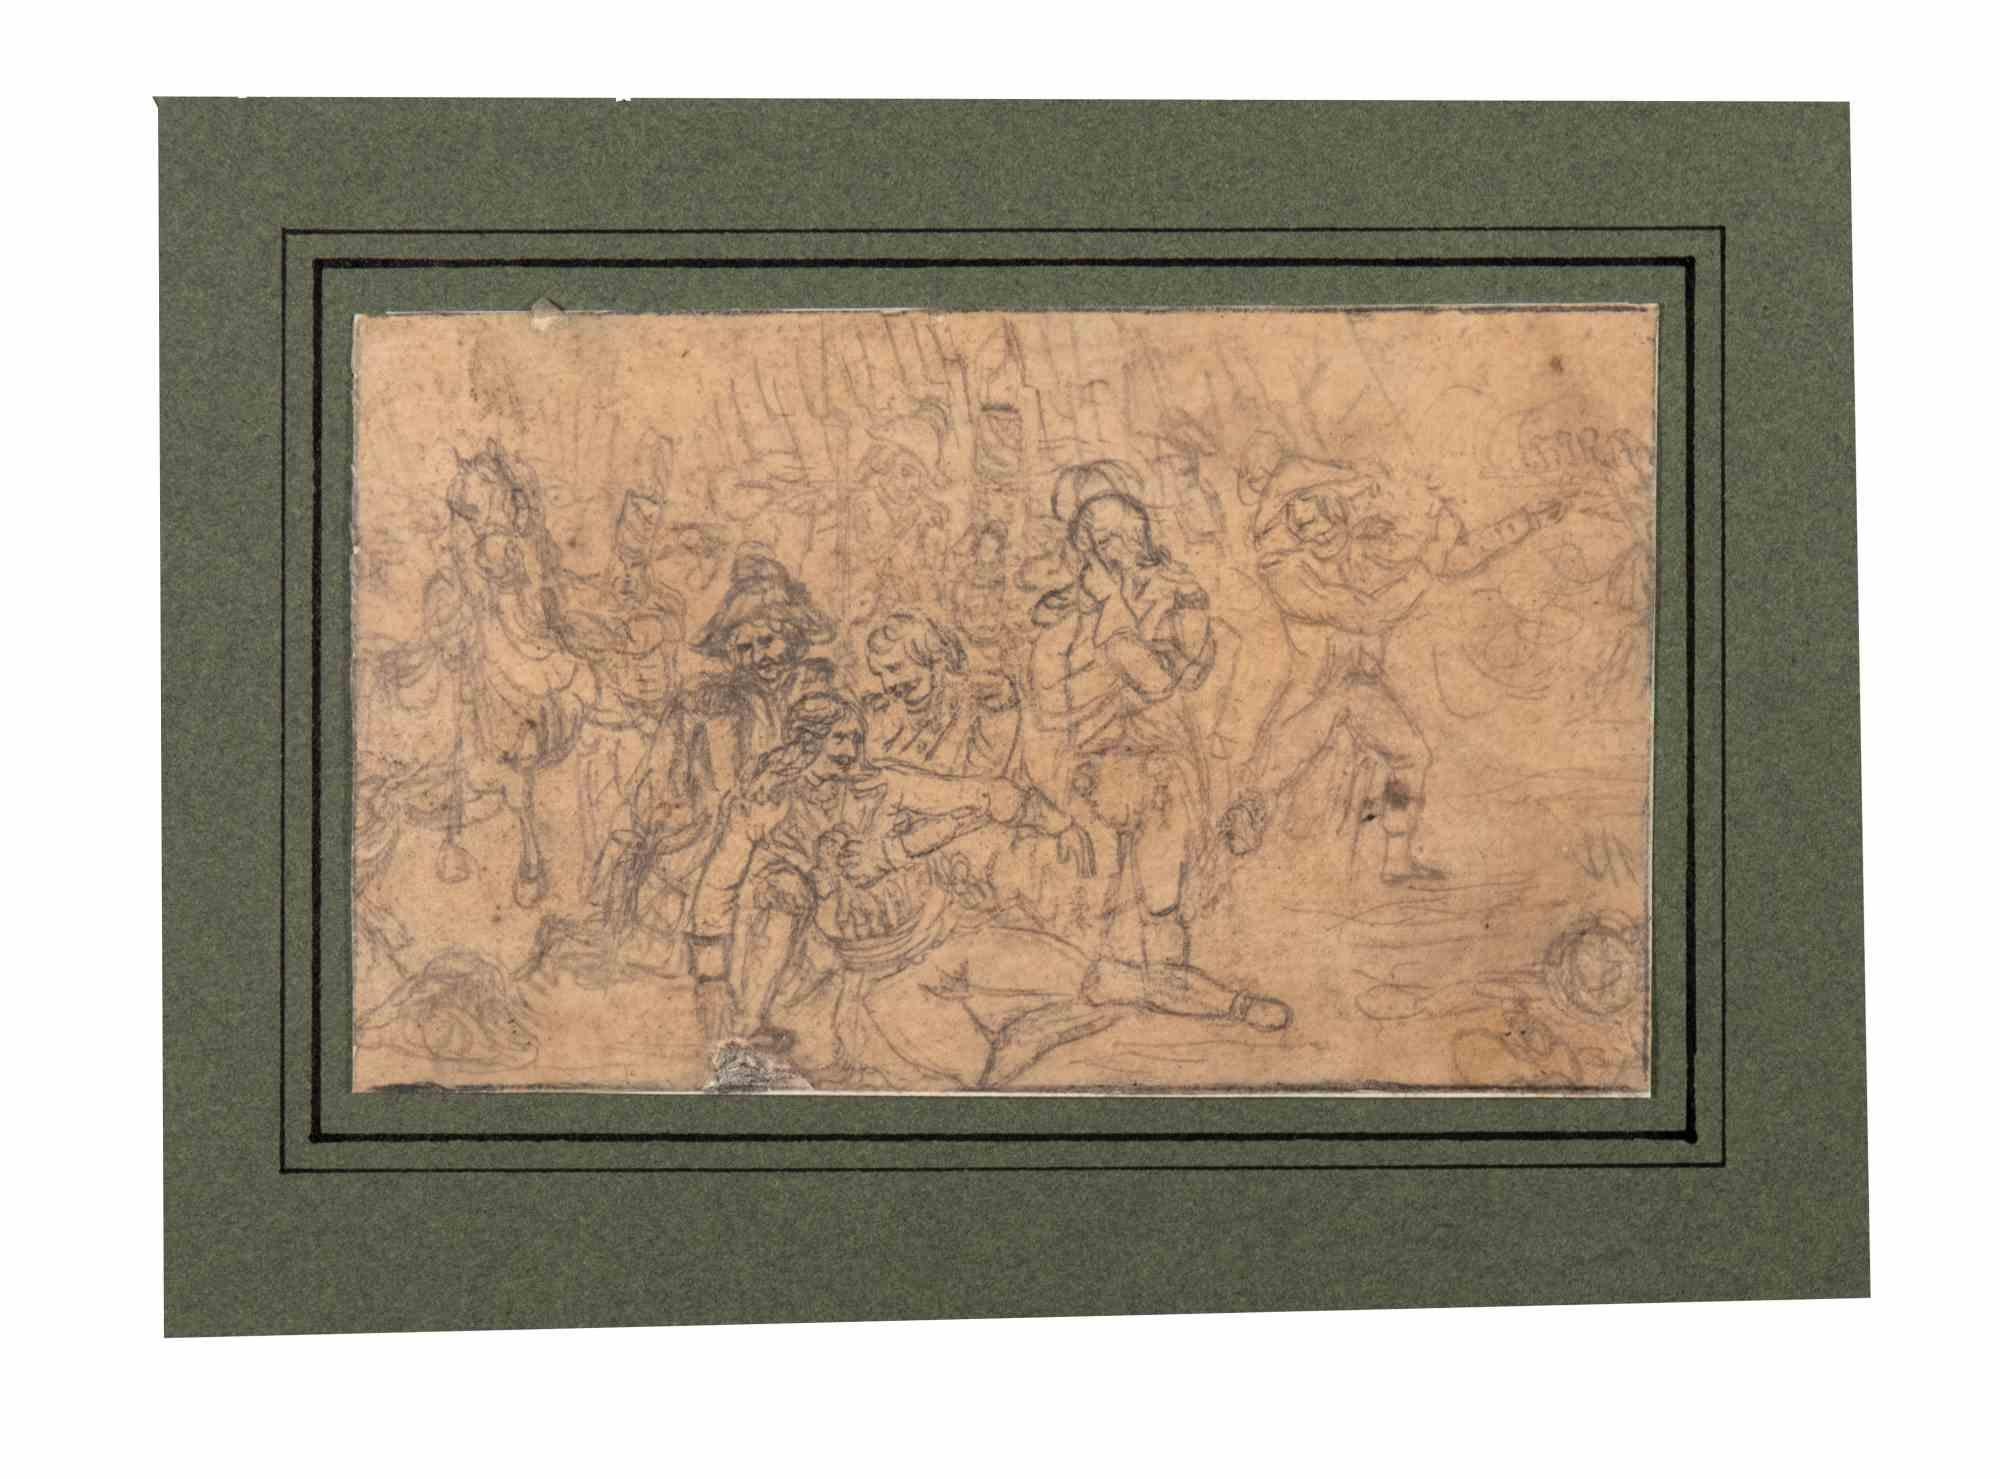 Figures is an Original Pencil Drawing realized by Denis Auguste Marie Raffet (1804-1860).

The little artwork is in good condition included a green cardboard passpartout (32.5x50 cm).

No signature.

Denis Auguste Marie Raffet (2 March 1804 – 16